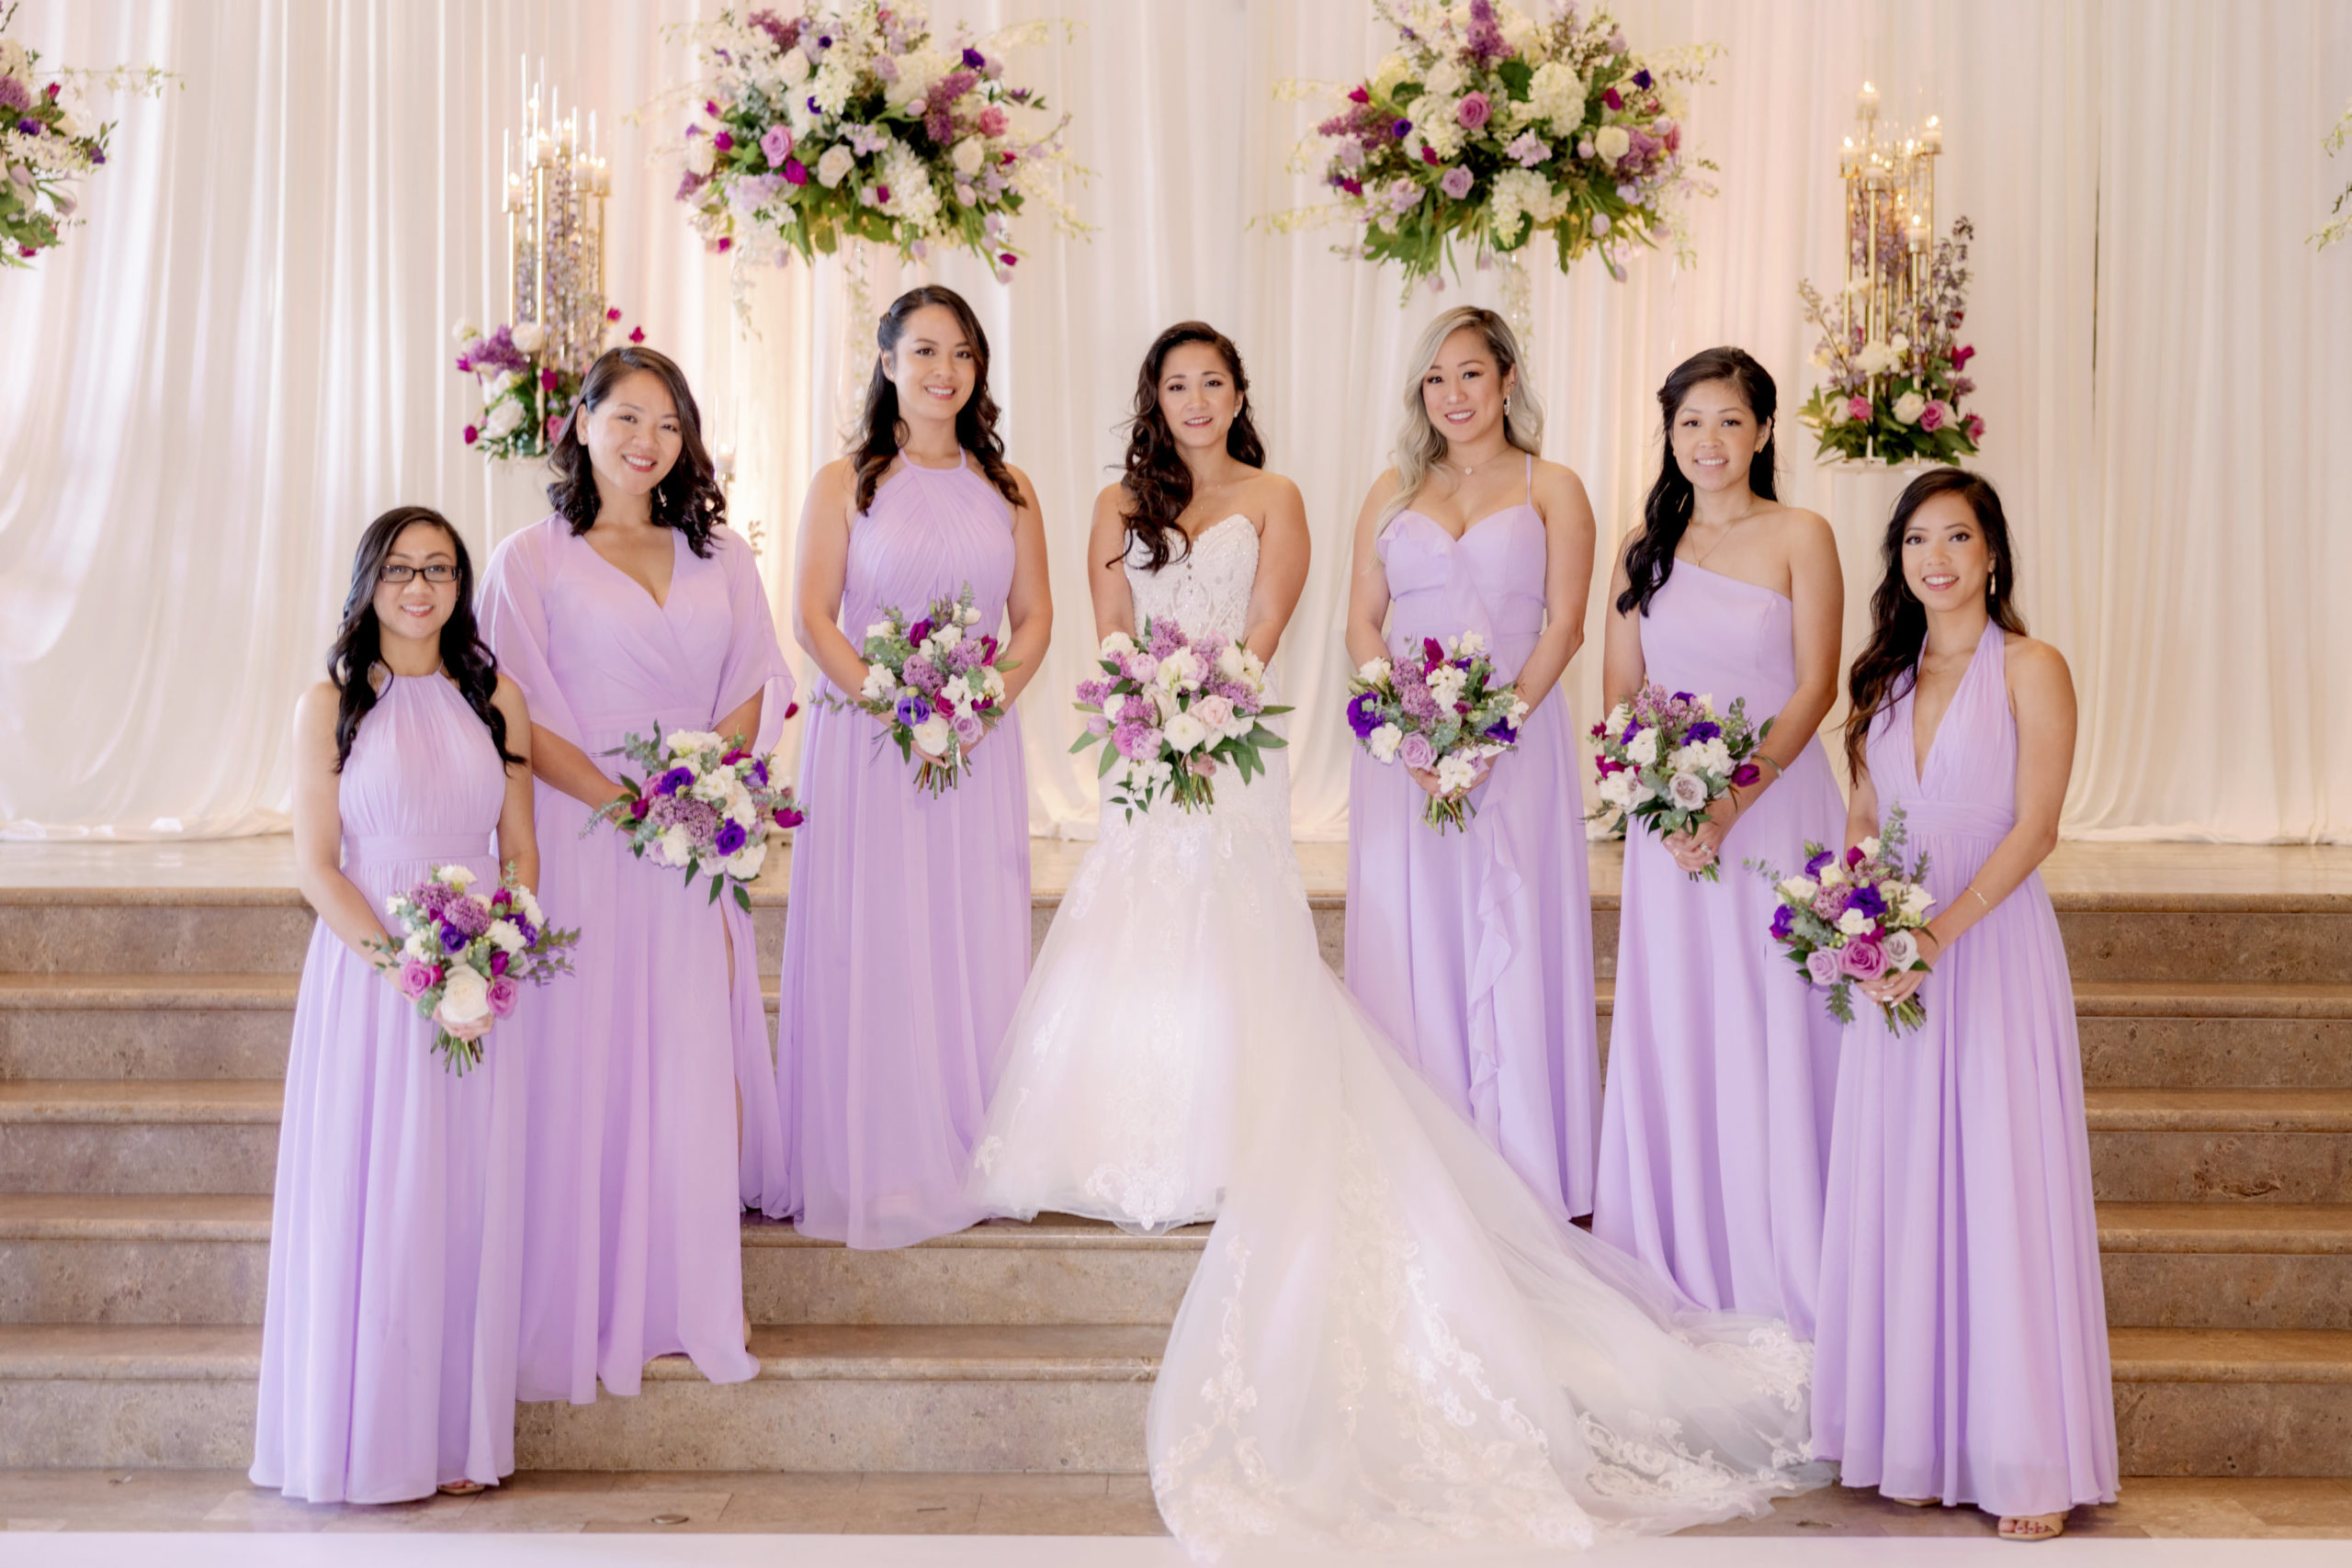 The bride and her bridesmaids wearing 2022 bridesmaid dresses. Editorial wedding image by Jenny Fu Studio.